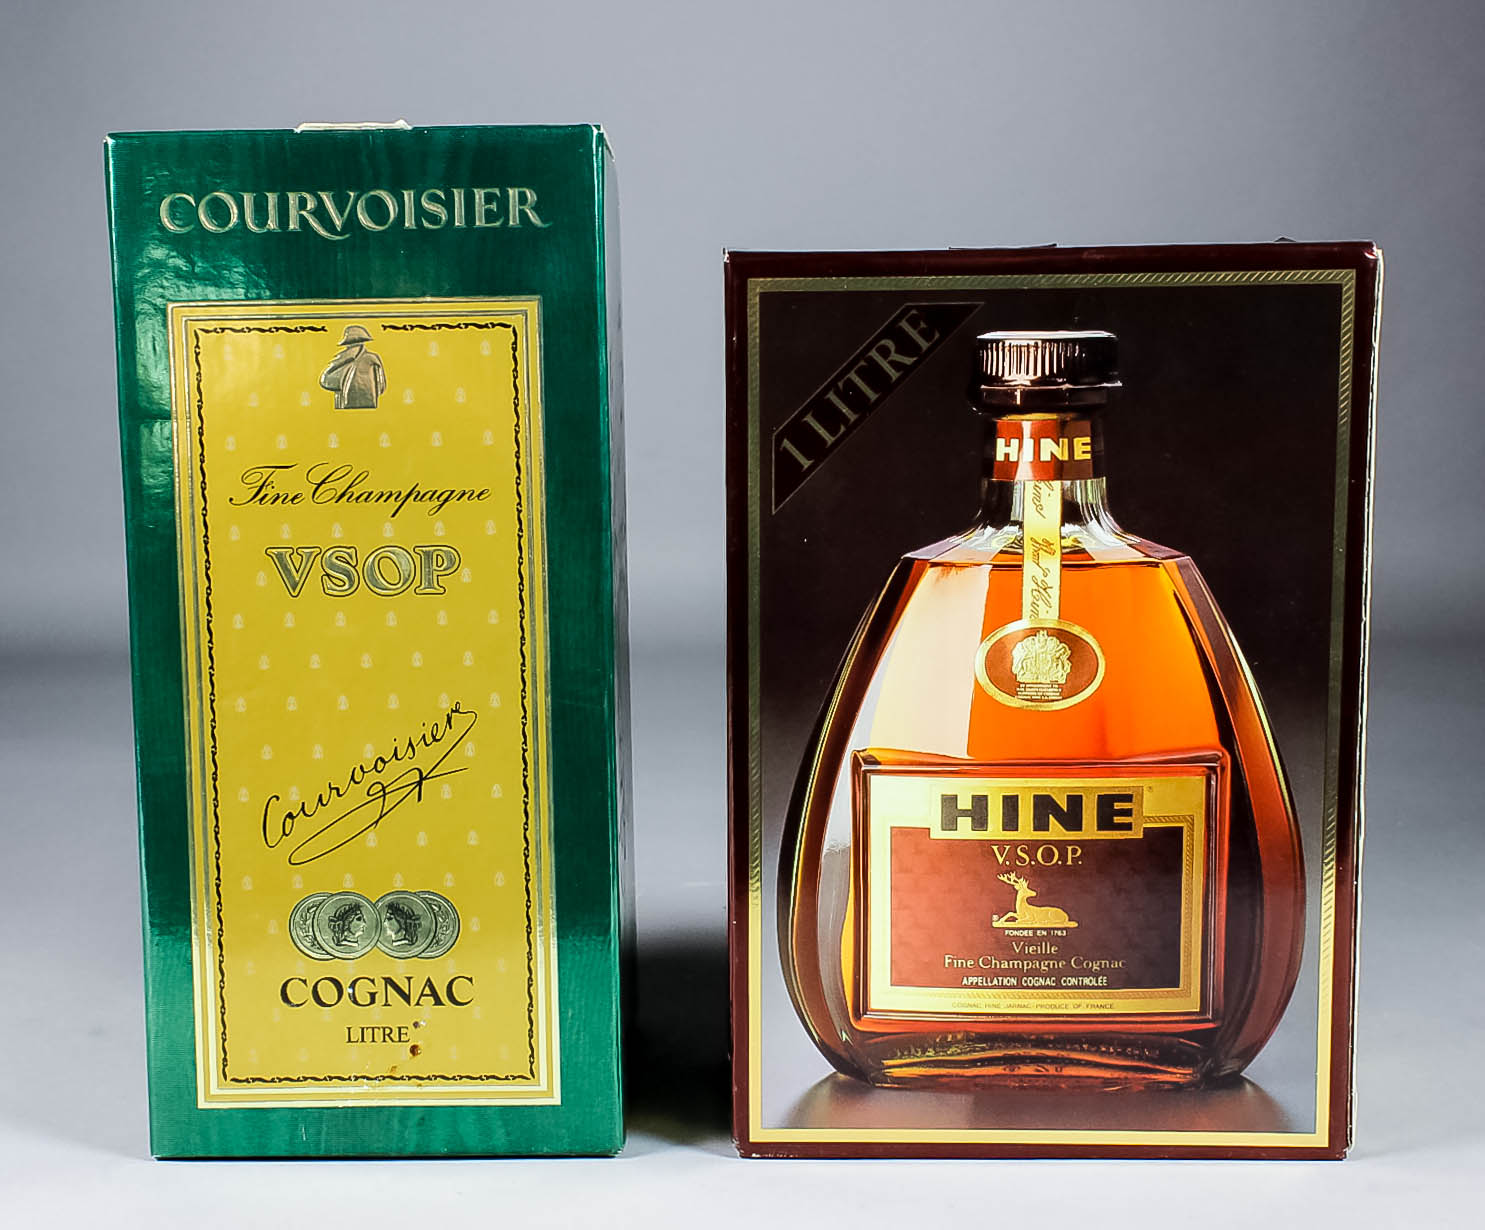 Three one litre bottles of Camus Celebration Cognac (40% proof), two one litre bottles of Hine